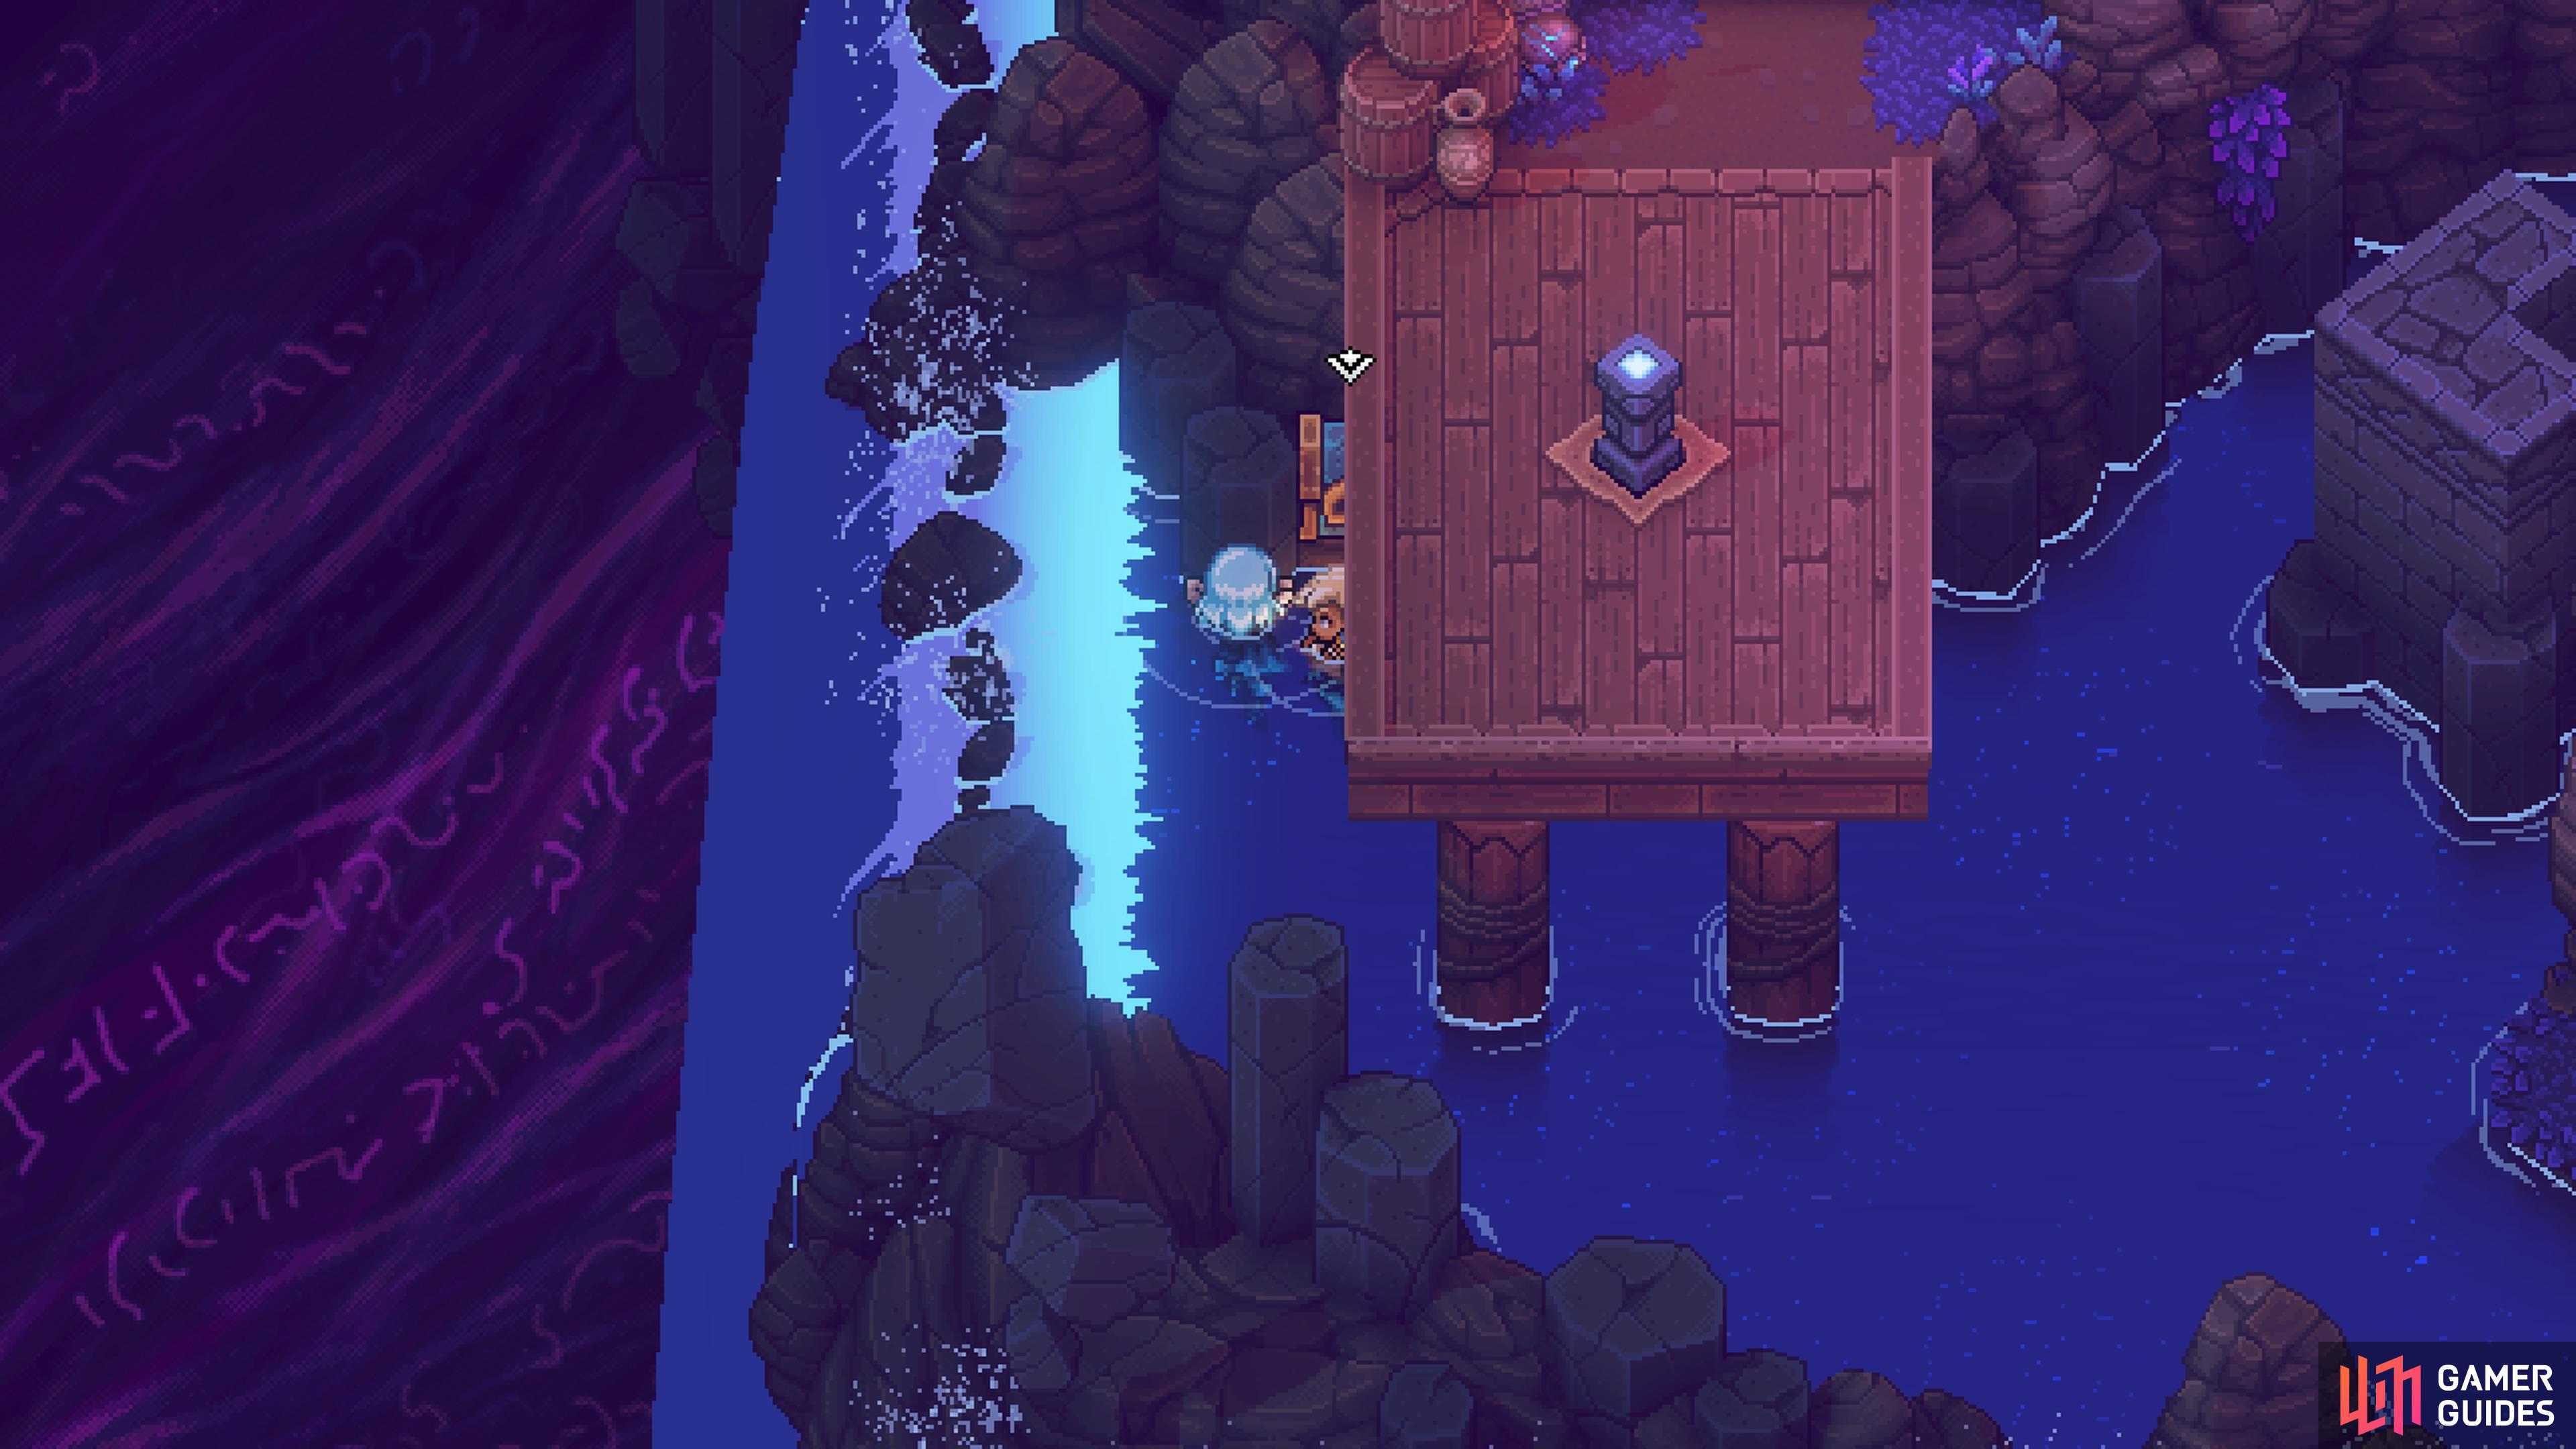 Swim underneath the pier here in the Turquoise Room to find a chest with a Rainbow Conch.